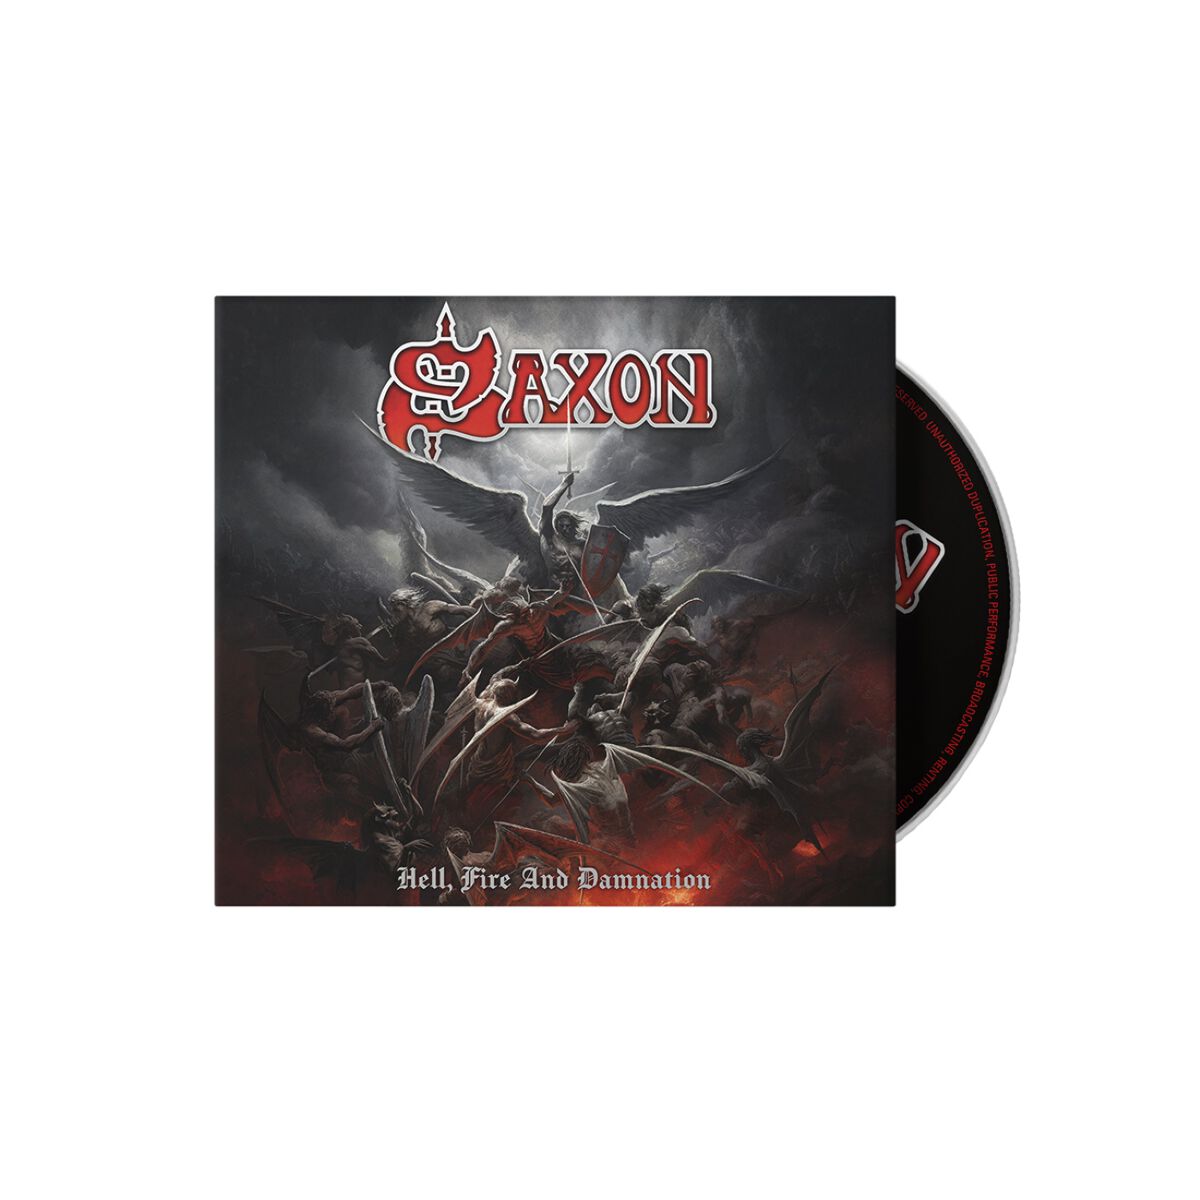 Saxon Hell, fire and damnation CD multicolor